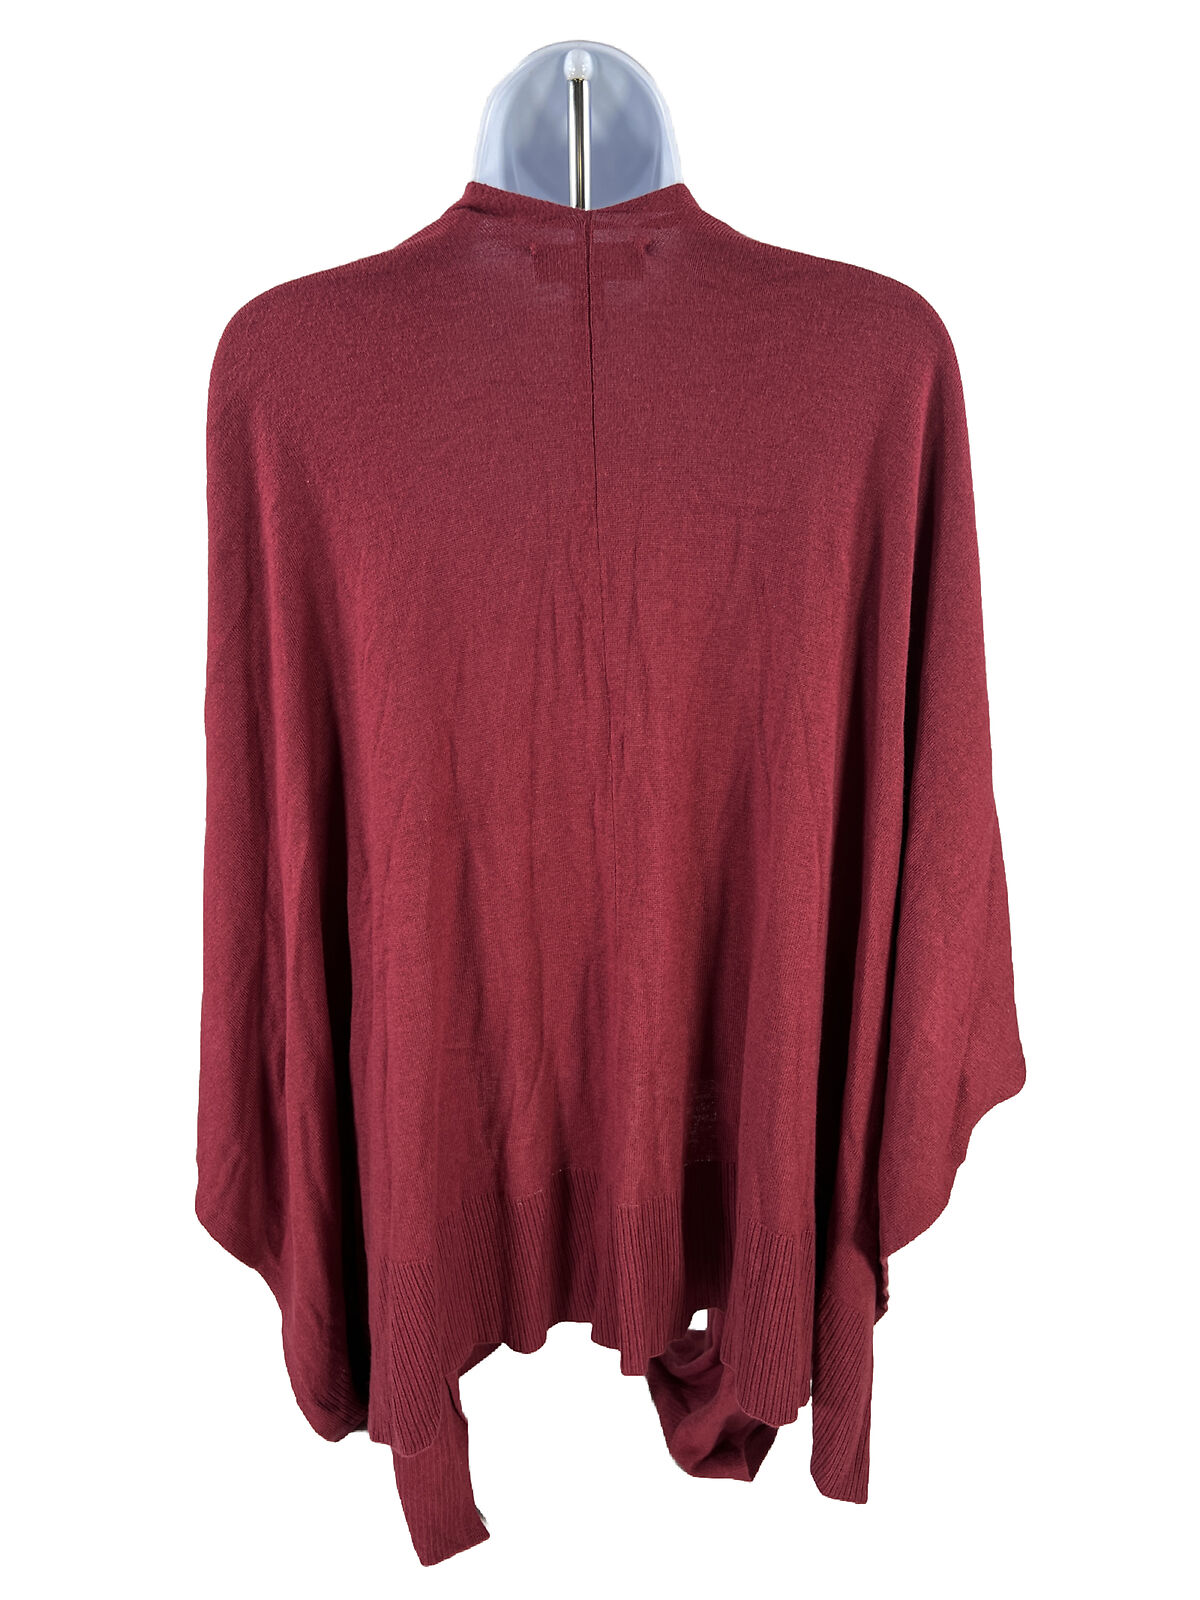 Nordstrom Women's Red Open Front Shawl Sweater - One Size